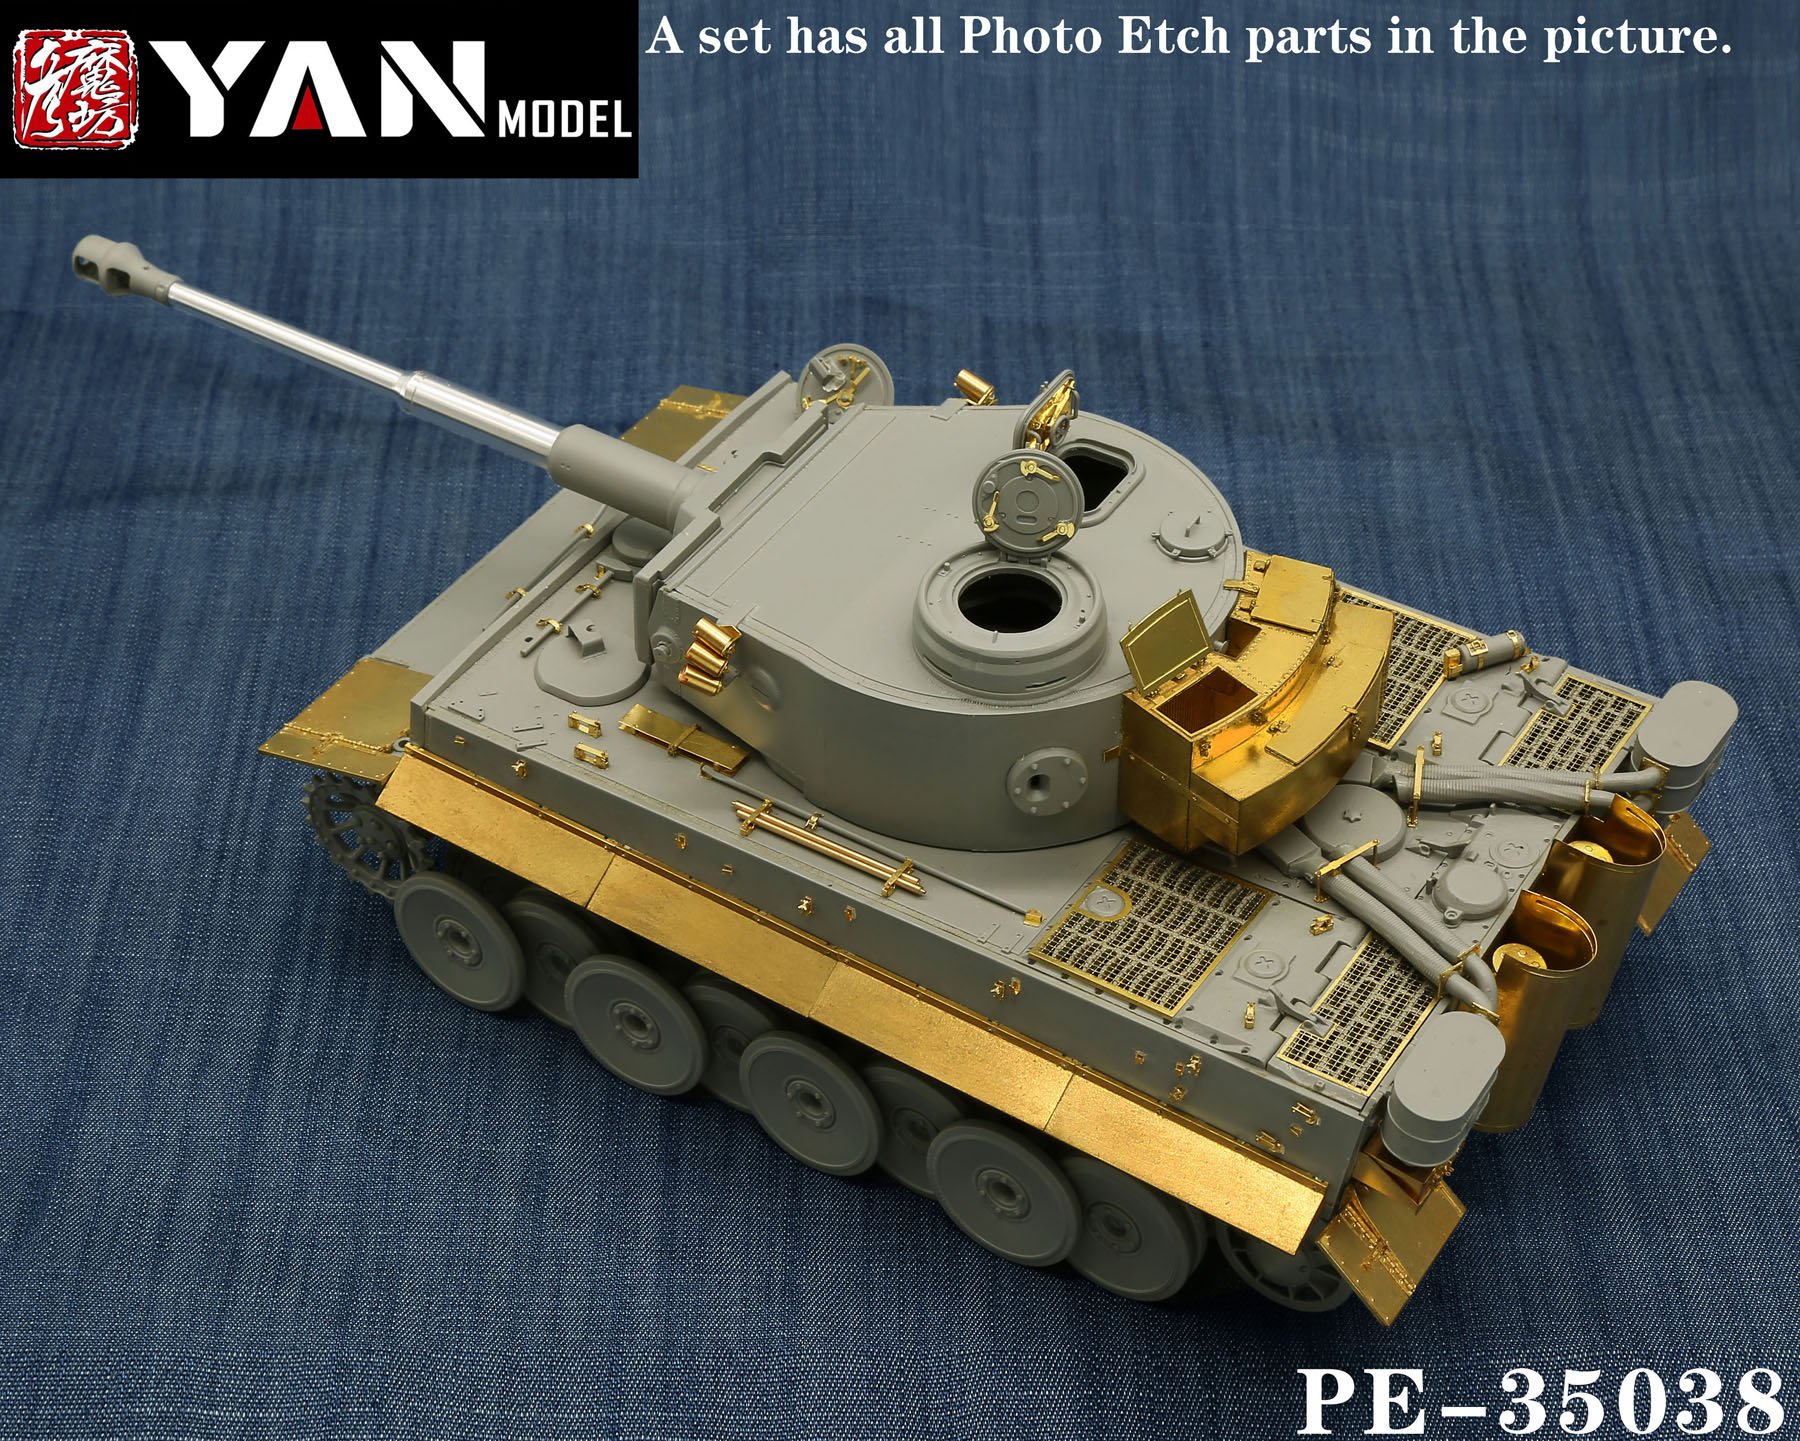 1/35 Tiger I Early Production Detail Up Set for Border BT-010 - Click Image to Close